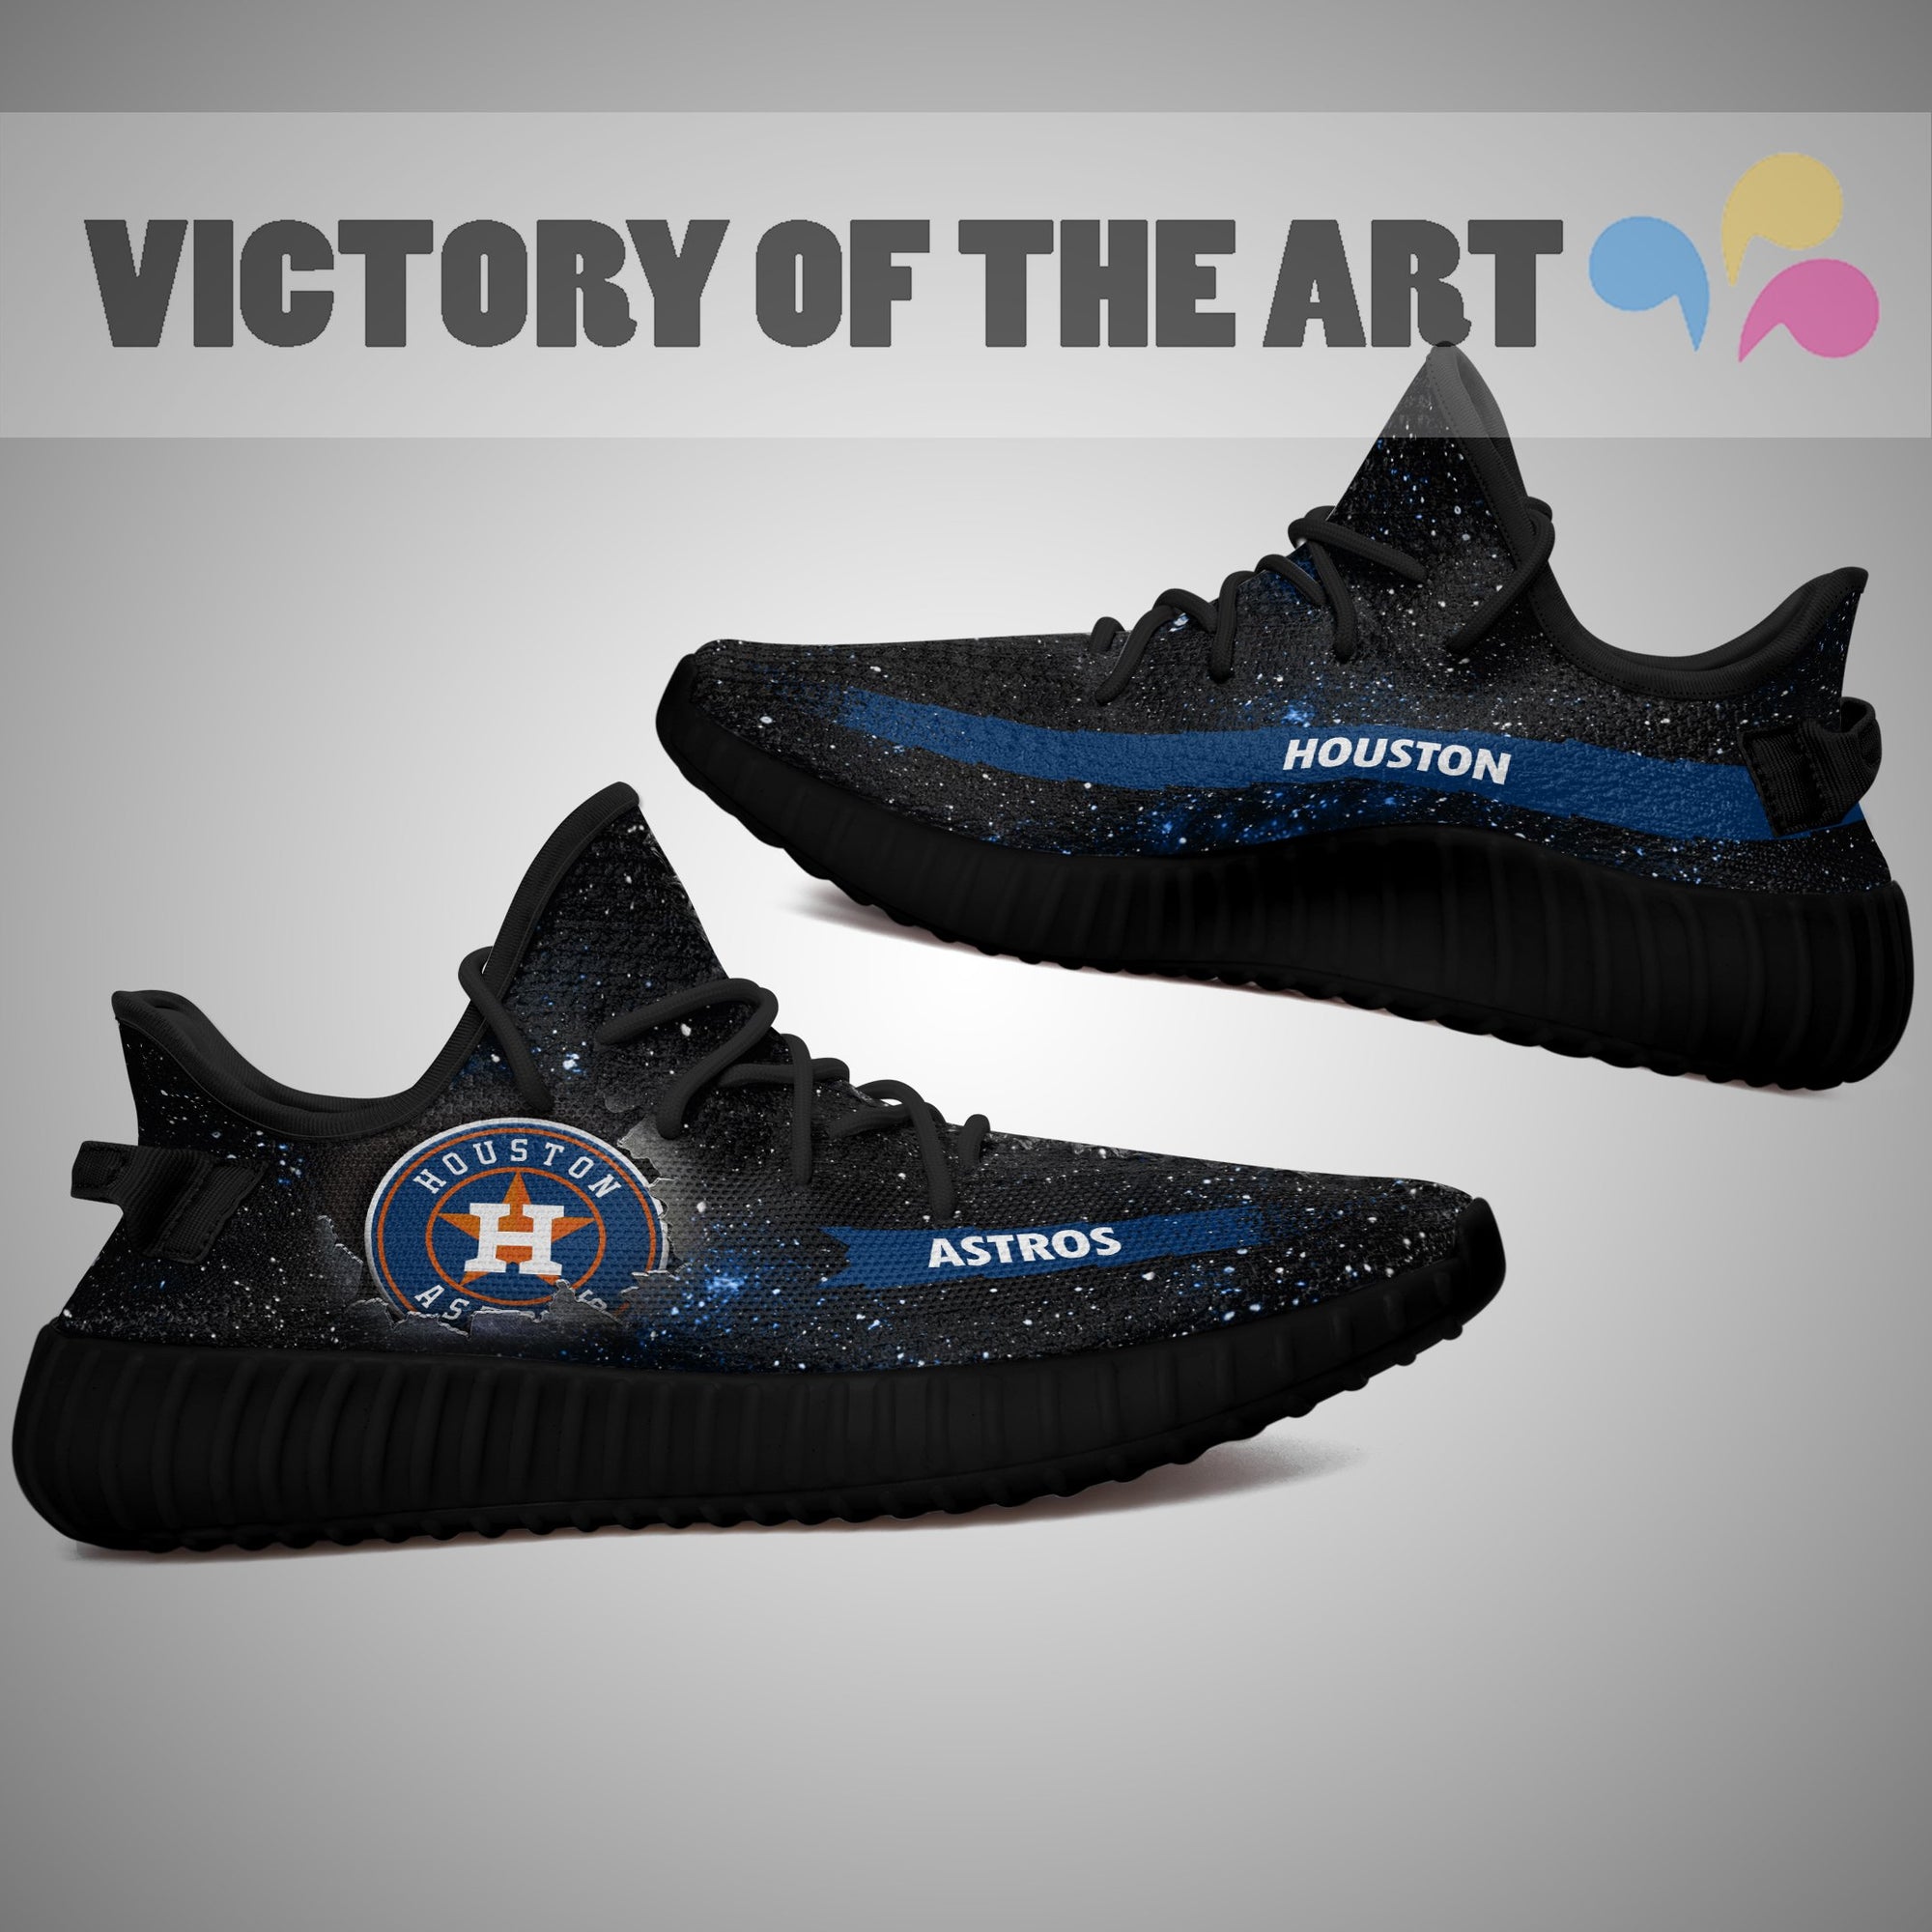 Houston Astros Yz Boots  Boots, Yezzy shoes, Houston astros